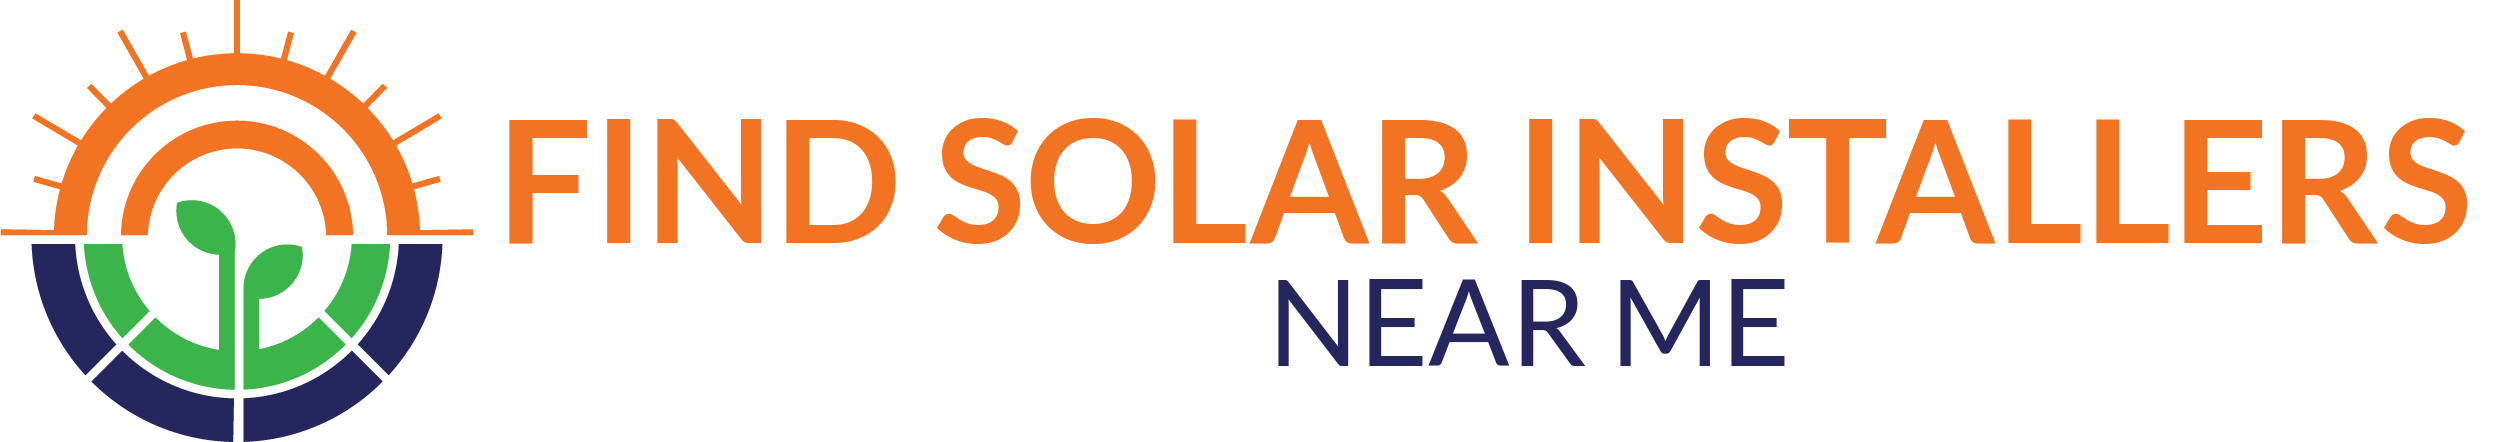 Find Solar Installers Near Me